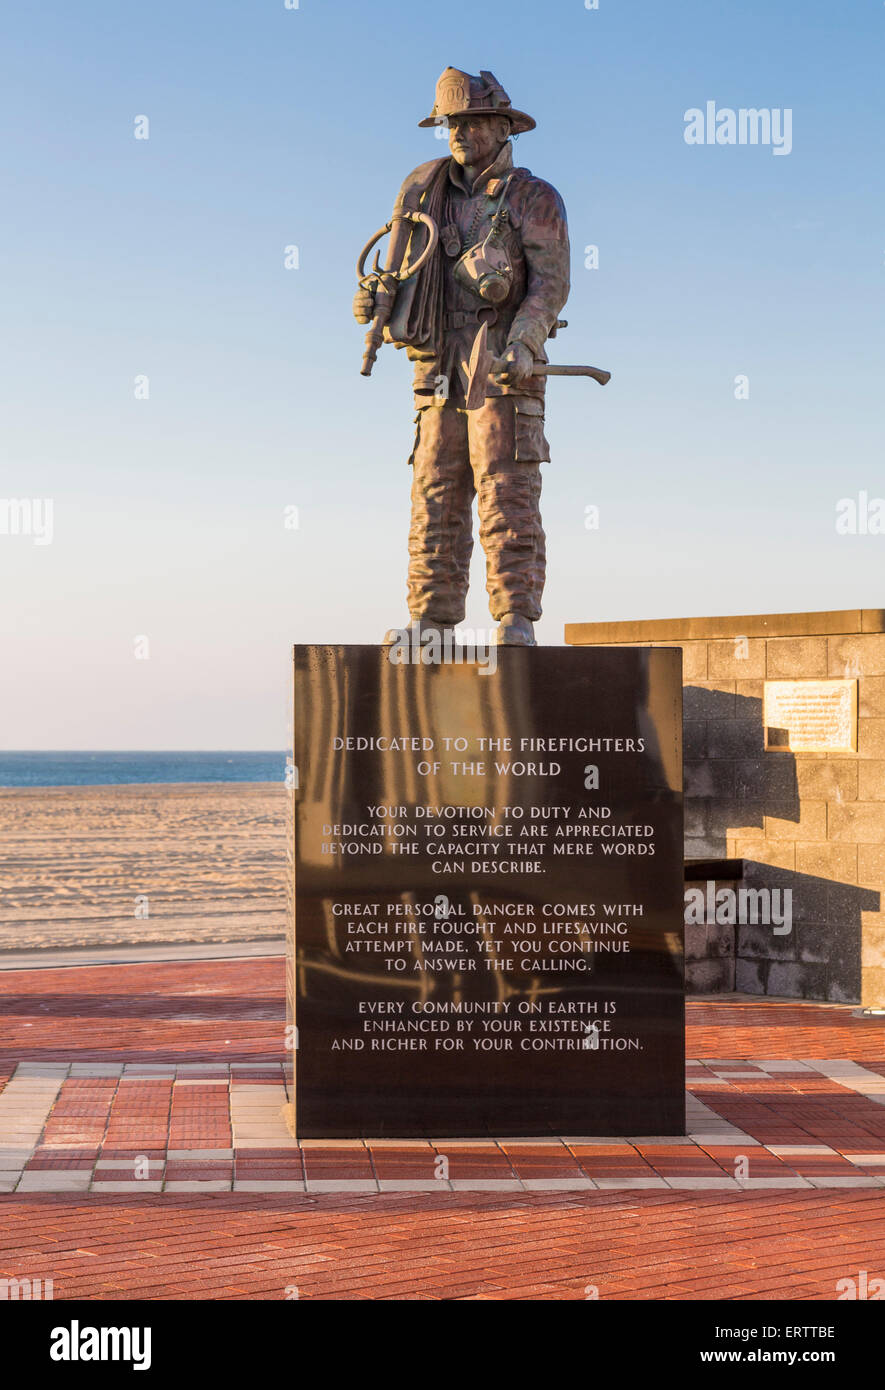 Bronze statue of fireman in monument to the firefighters who lost lives on September 11 installed in Ocean City, Maryland, USA Stock Photo